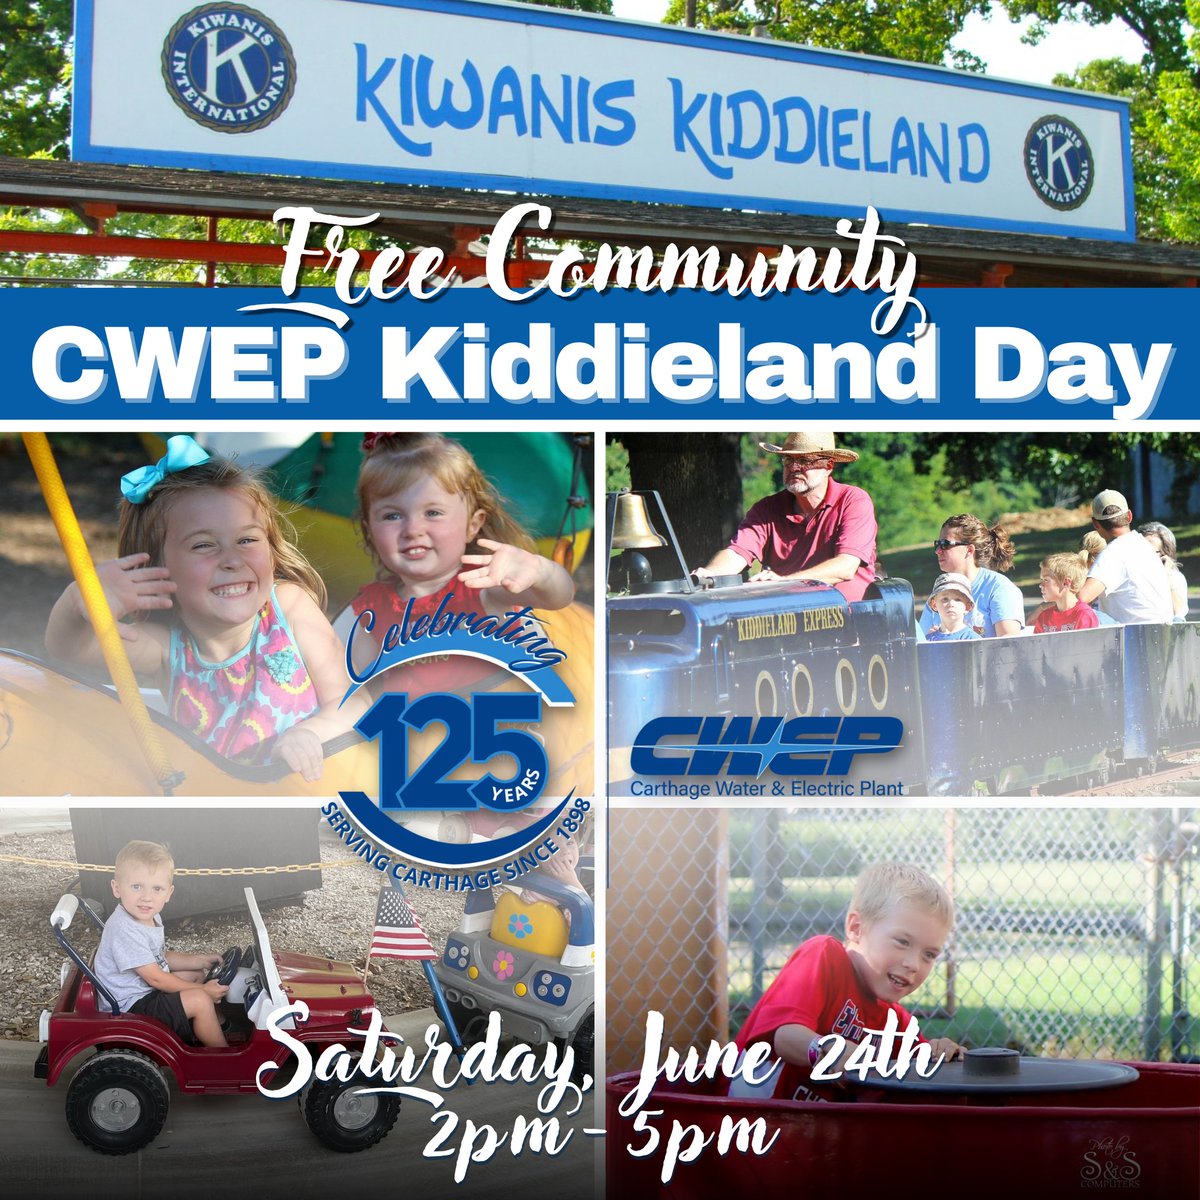 𝗧𝗛𝗜𝗦 𝗦𝗔𝗧𝗨𝗥𝗗𝗔𝗬, 𝗝𝗨𝗡𝗘 𝟮𝟰𝗧𝗛 CWEP is sponsoring a fun & 𝗙𝗥𝗘𝗘 day at Kiddieland! What better way to celebrate 125 years of CWEP serving Carthage than with a fun community event at Kiddieland?! We hope to see everyone there!
.
.
.
#PublicPower #125YearsStrong